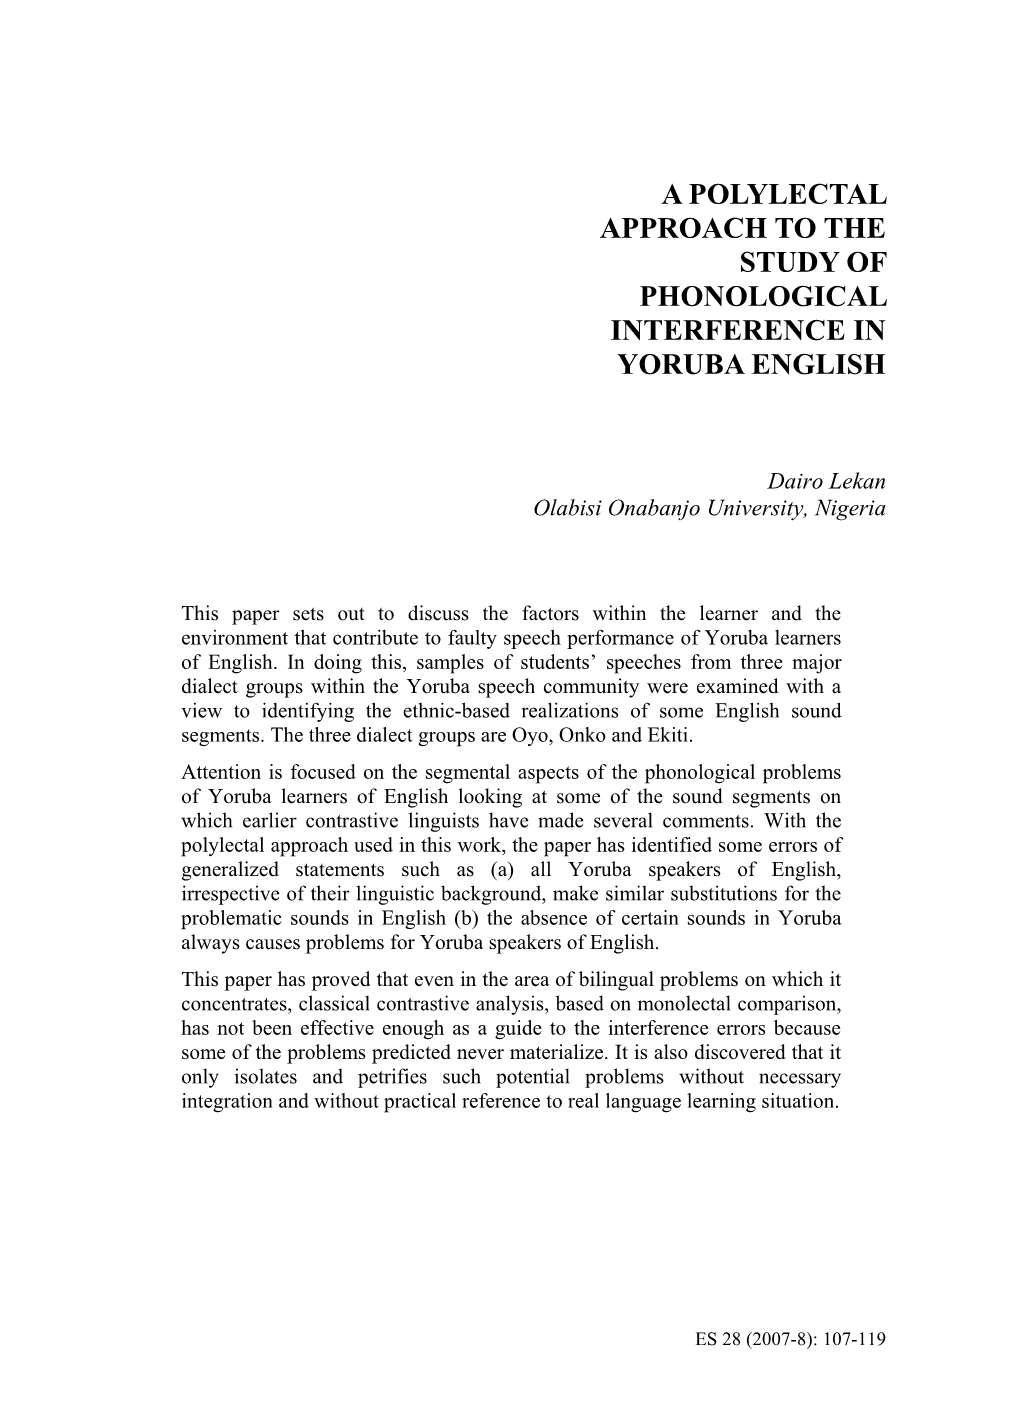 A Polylectal Approach to the Study of Phonological Interference in Yoruba English